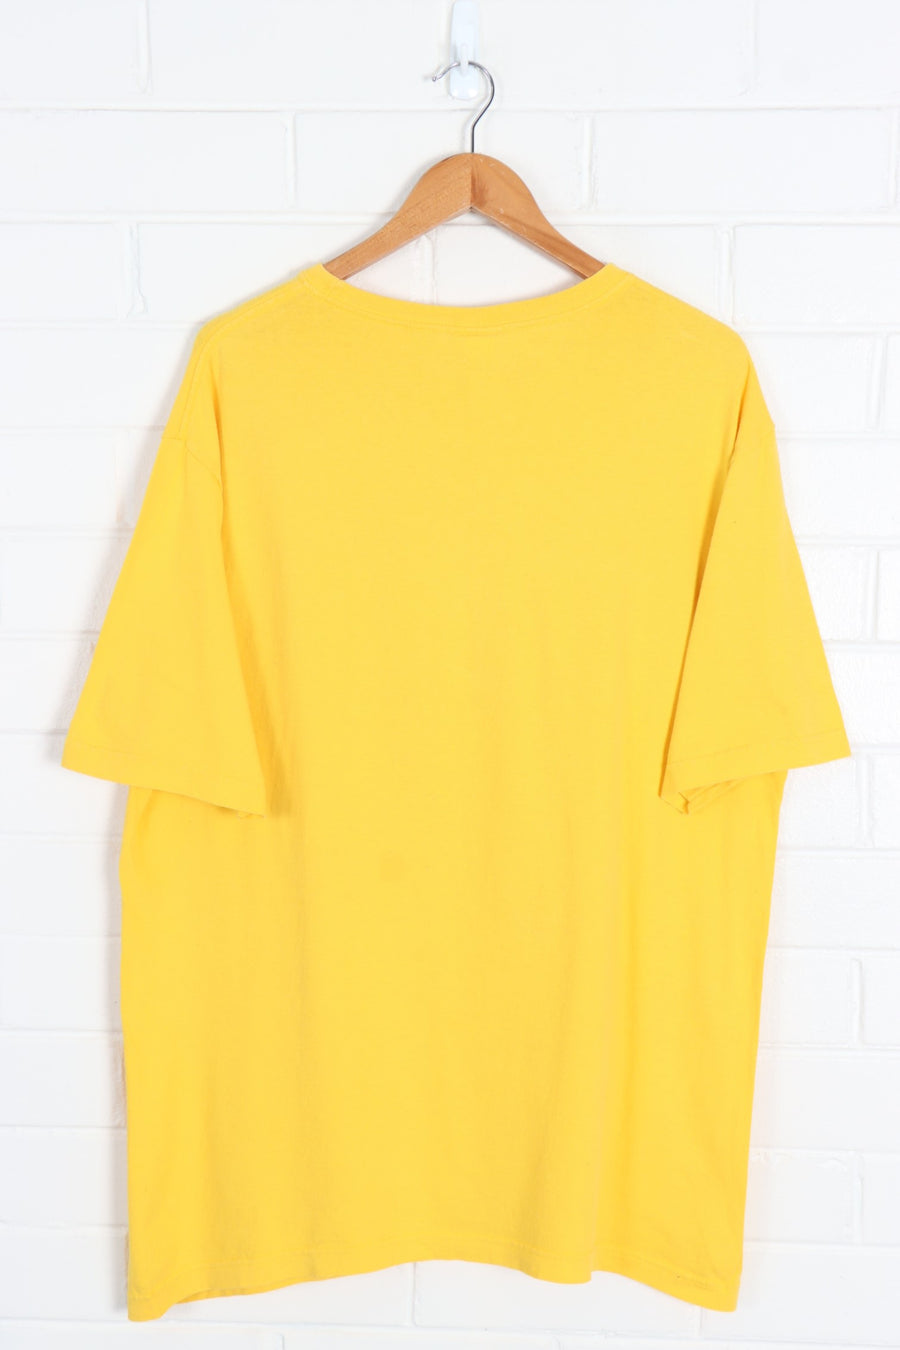 Yellow TOMMY HILFIGER 'American Classic' Graphic Tee (XL) - Vintage Sole Melbourne